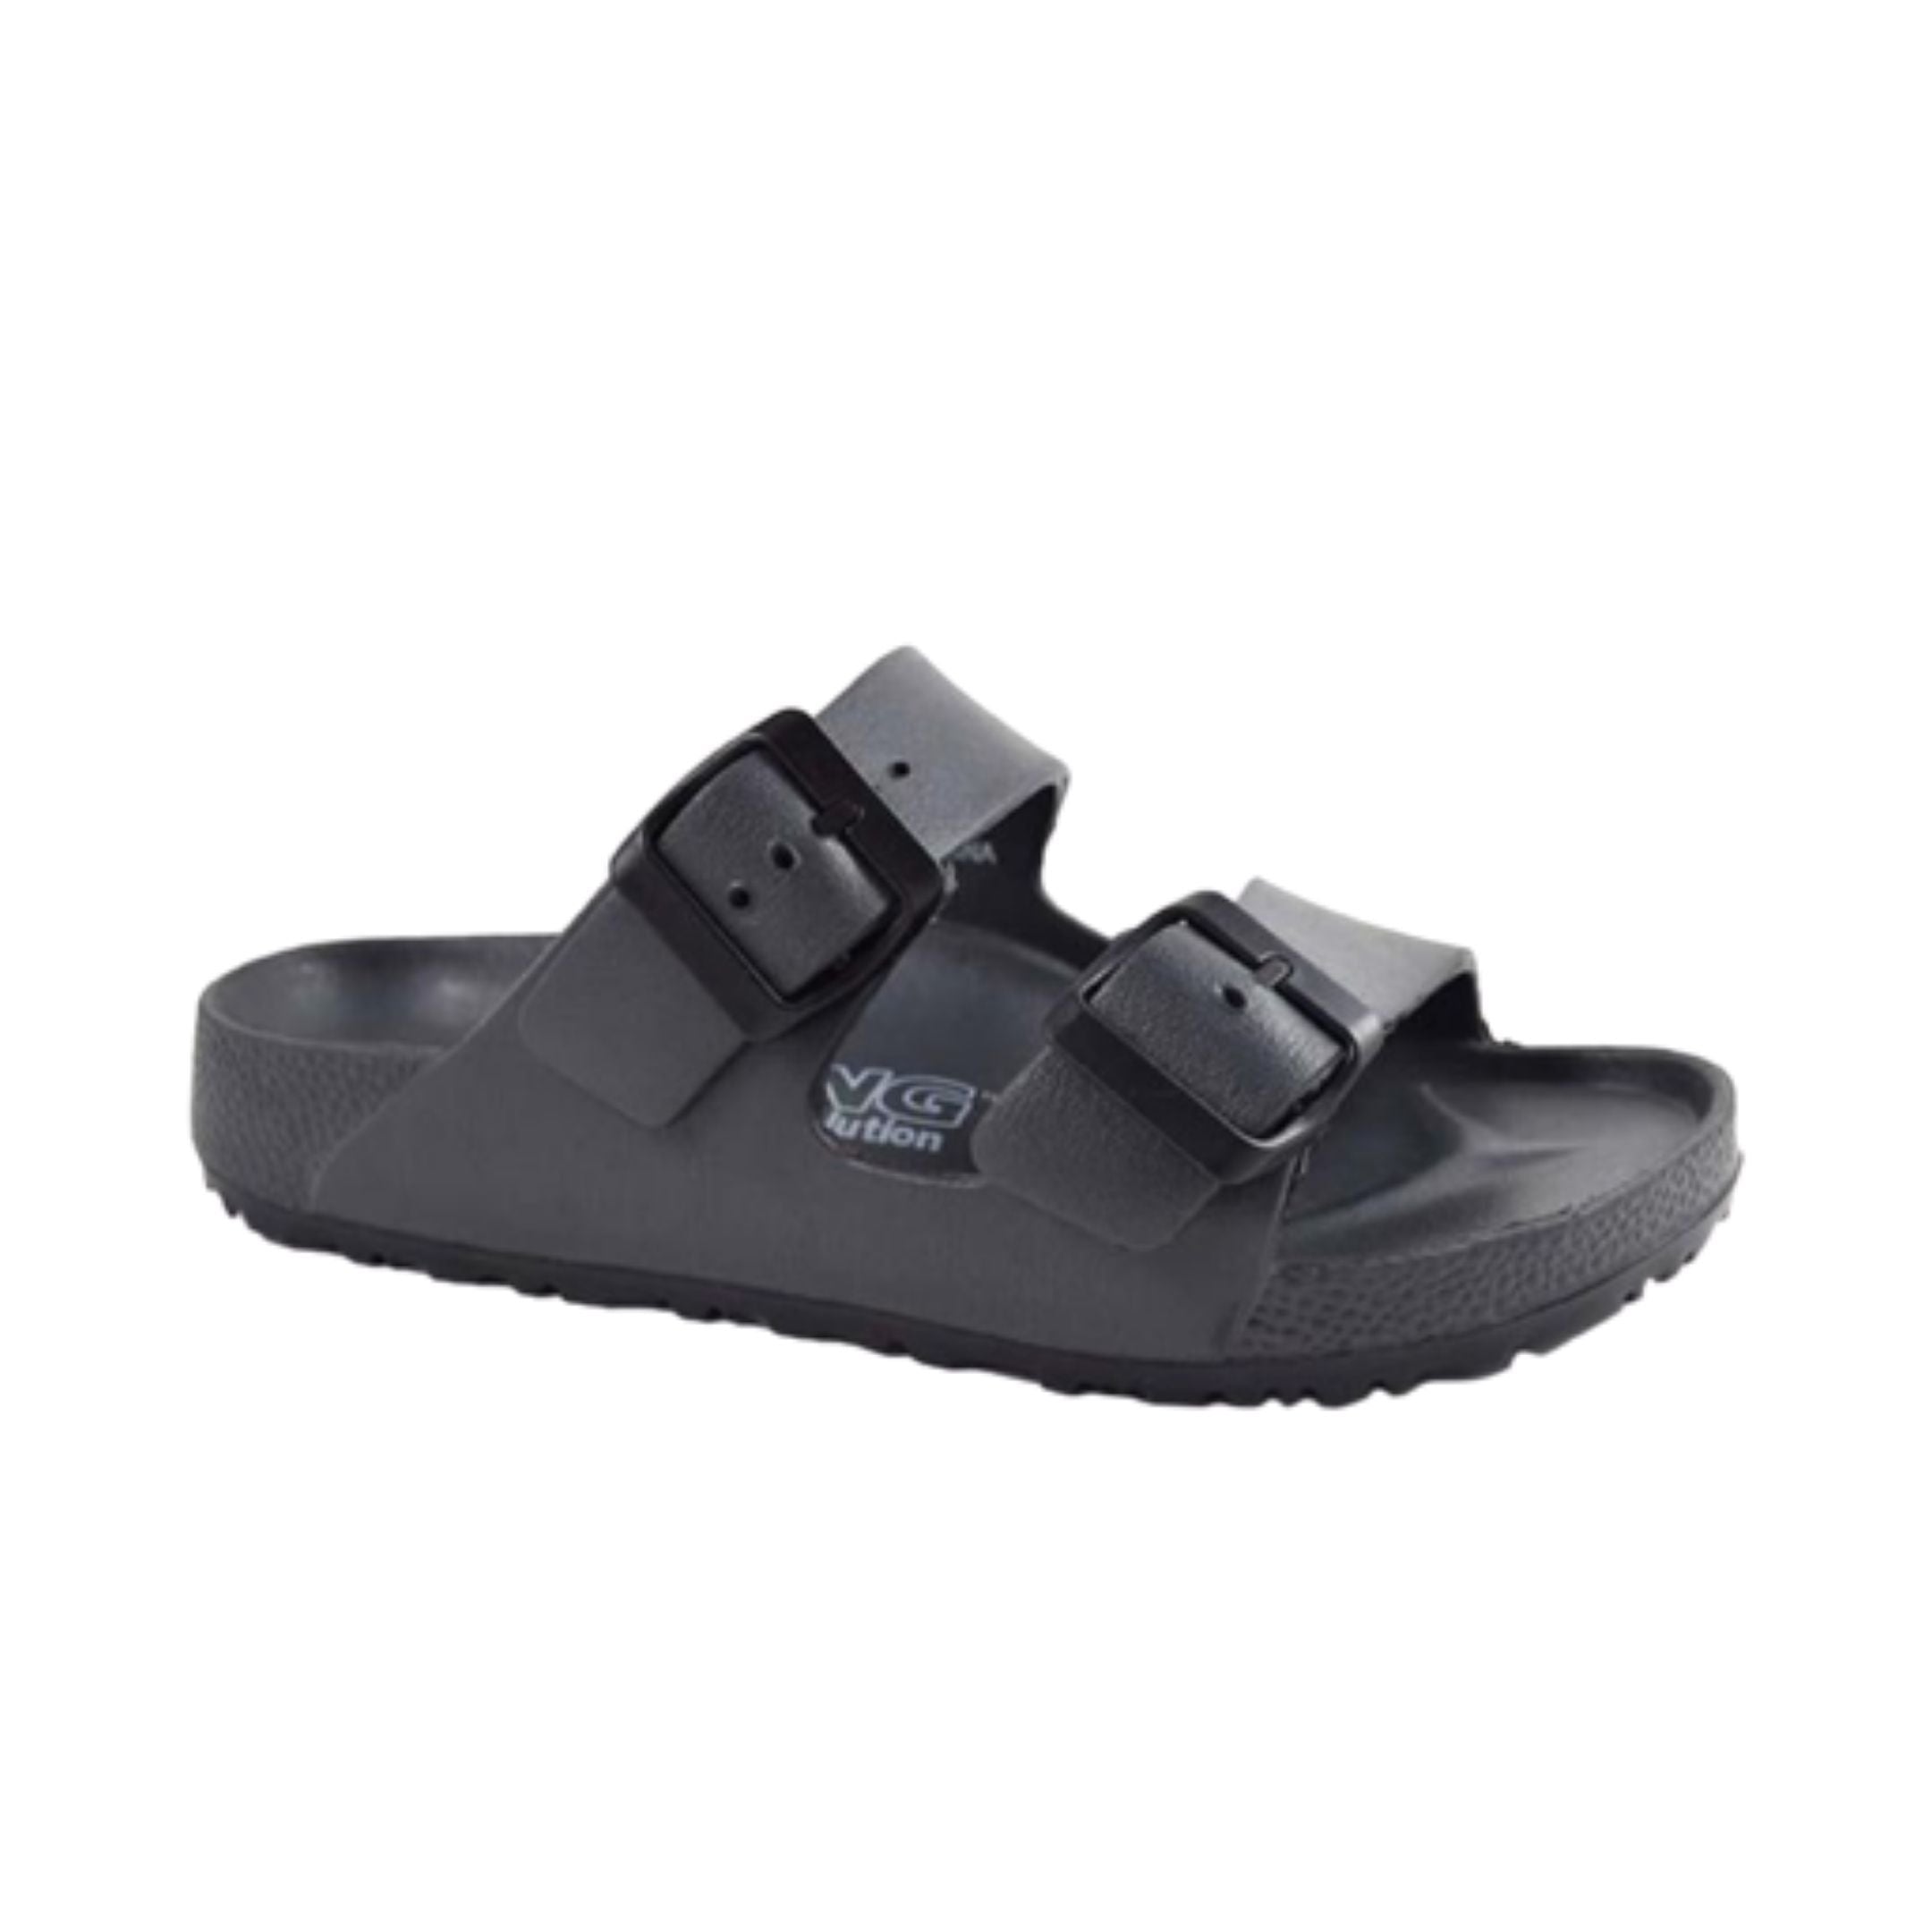 Grey EVA sandal with two black buckles and white outsole.